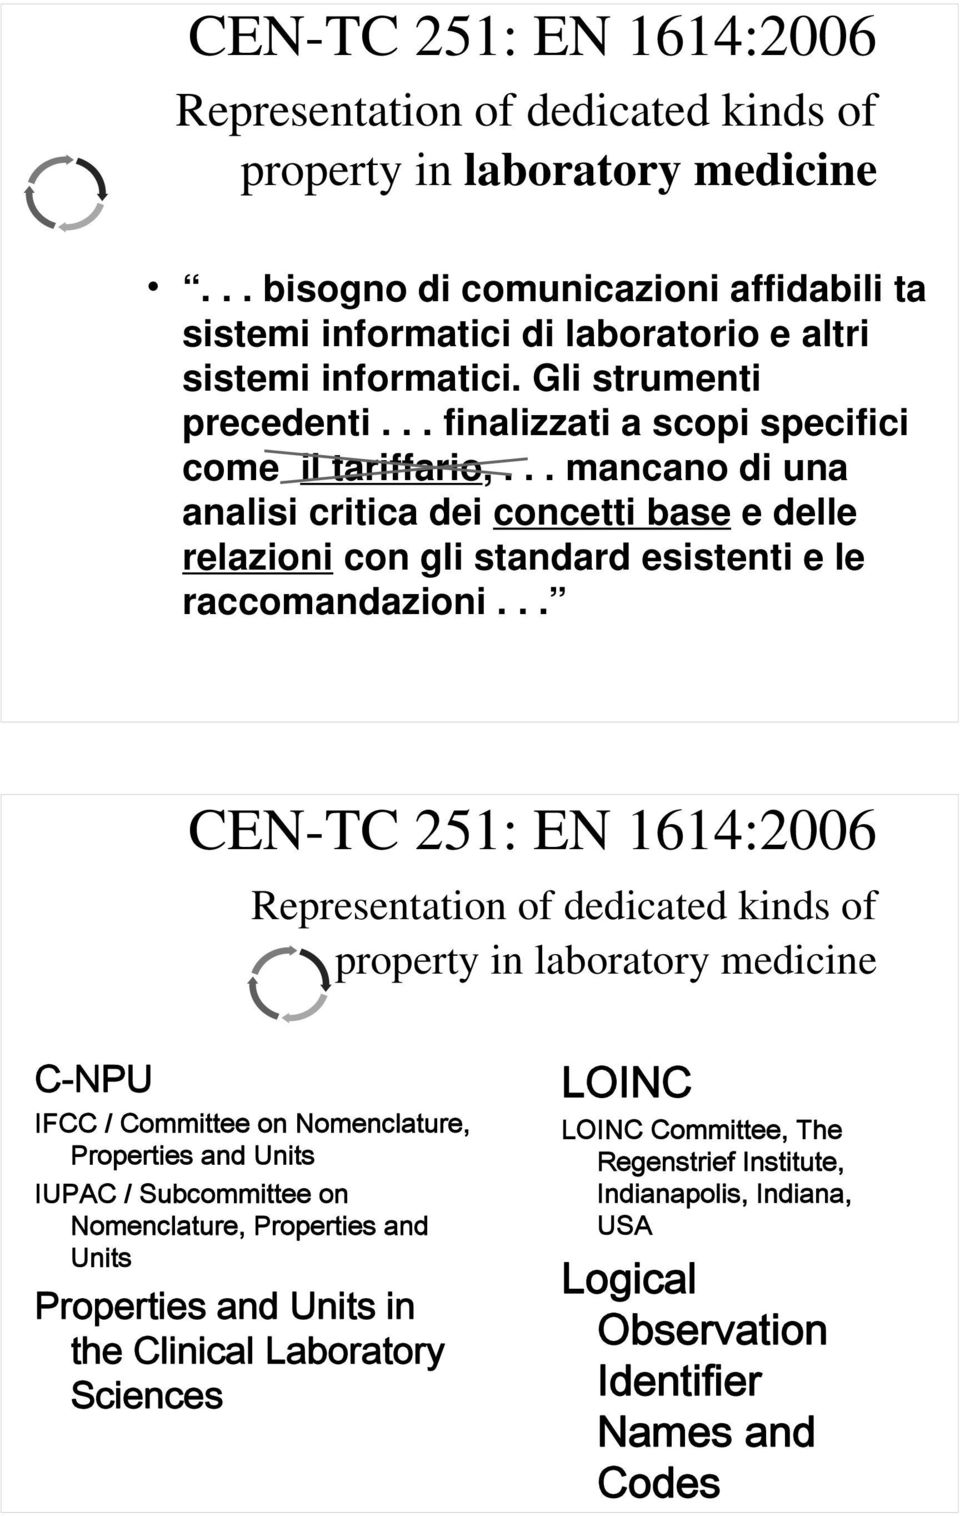 .. CEN-TC 251: EN 1614:2006 Representation of dedicated kinds of property in laboratory medicine C-NPU IFCC / Committee on Nomenclature, Properties and Units IUPAC / Subcommittee on Nomenclature,